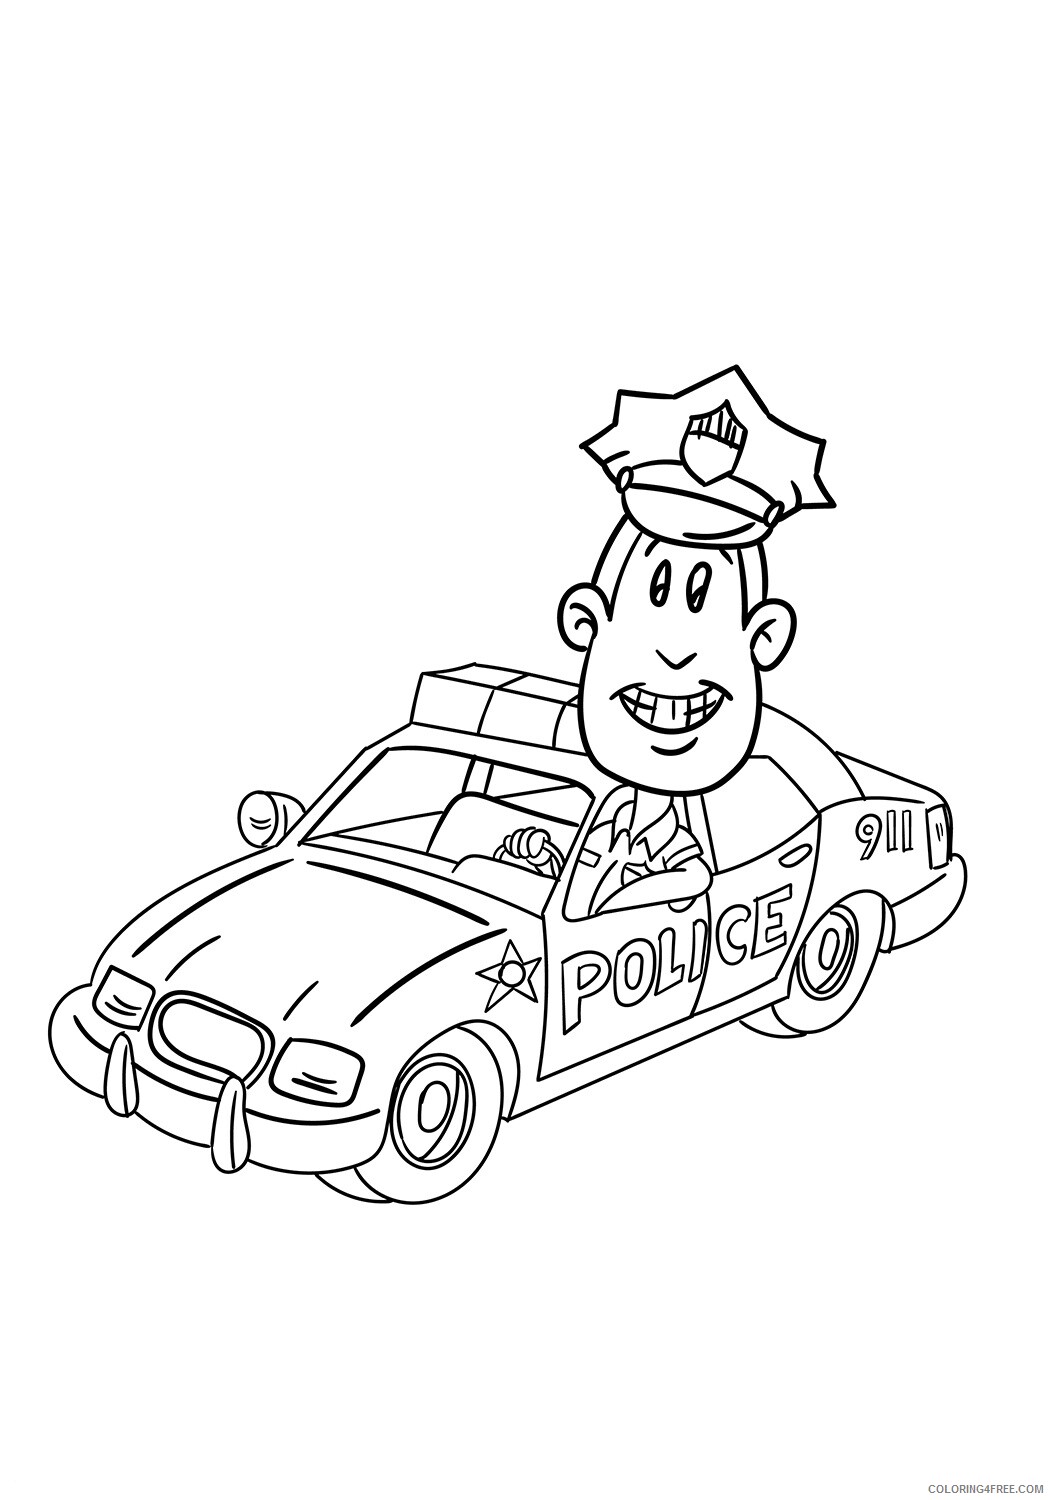 Police Car Coloring Pages for boys the policeman in car Printable 2020 0800 Coloring4free